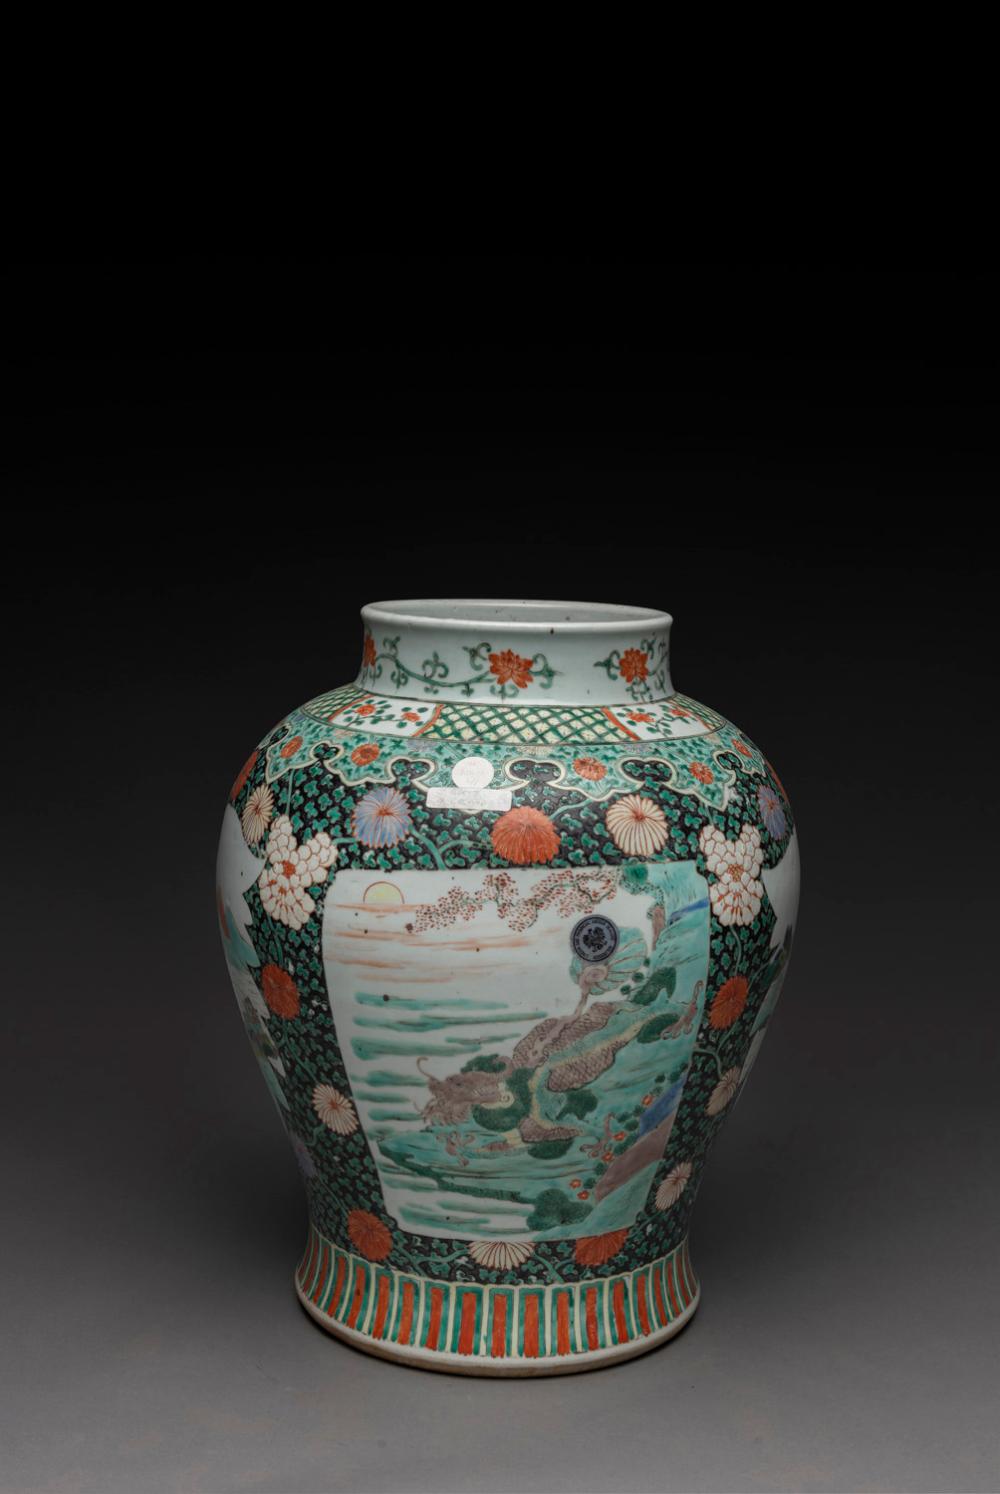 A CHINESE LARGE FAMILLE-VERTE WUCAI VASE, QING DYNASTY